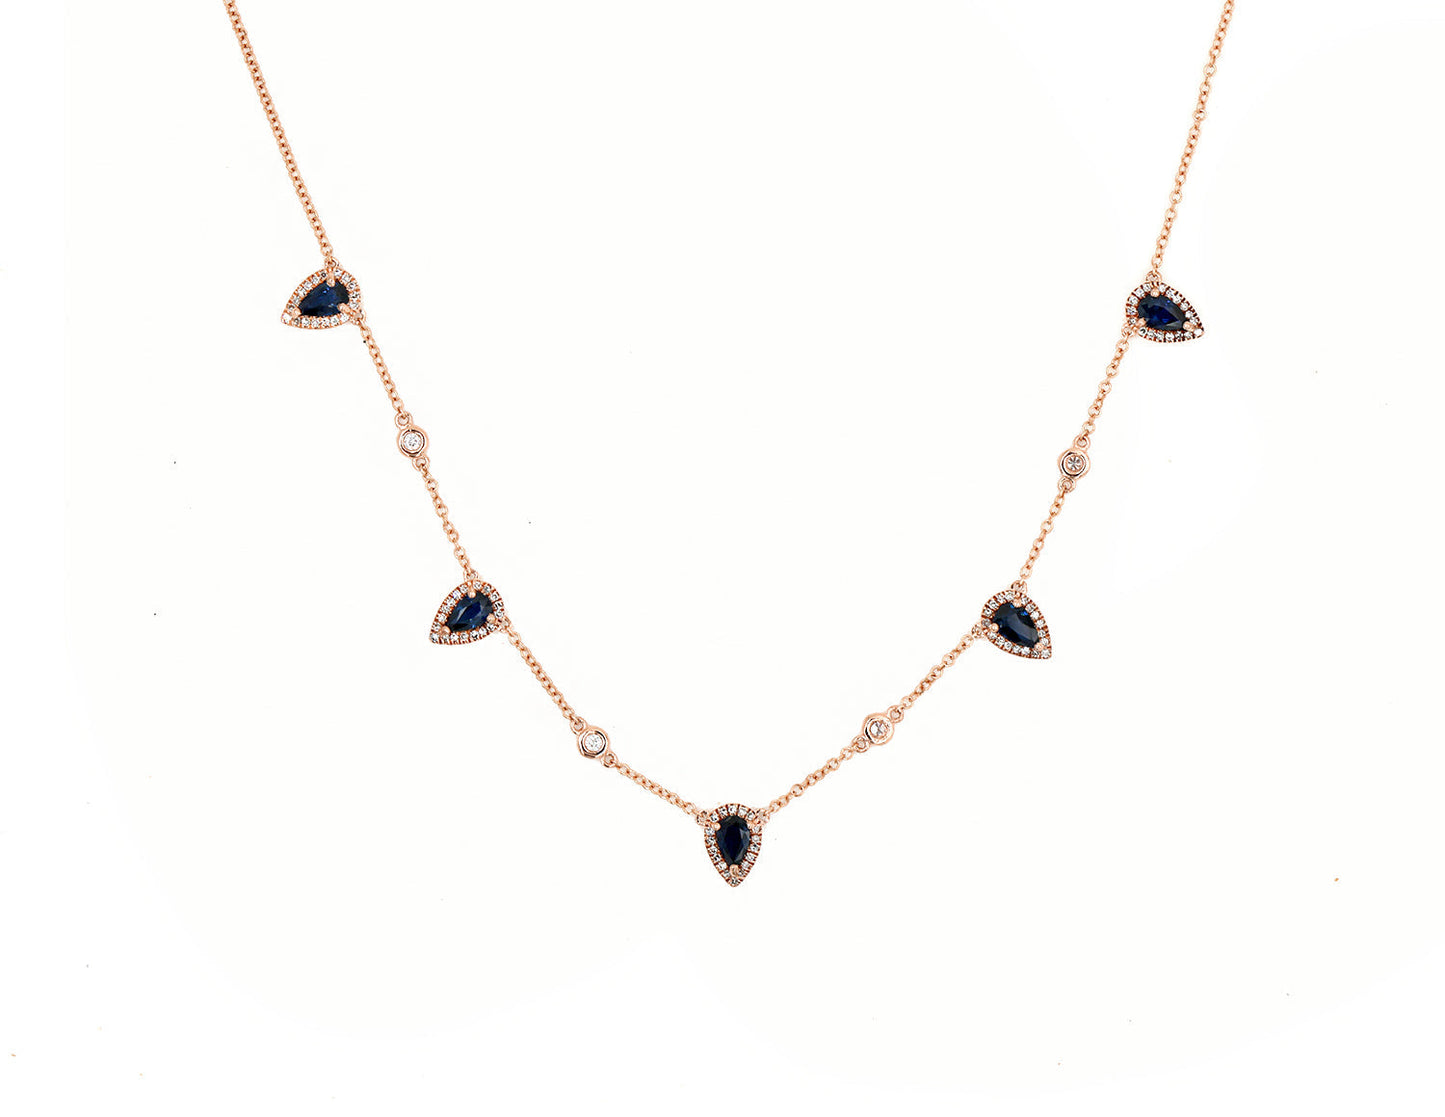 14k Rose Gold Diamond and Sapphire Multiple Pear Shape Necklace